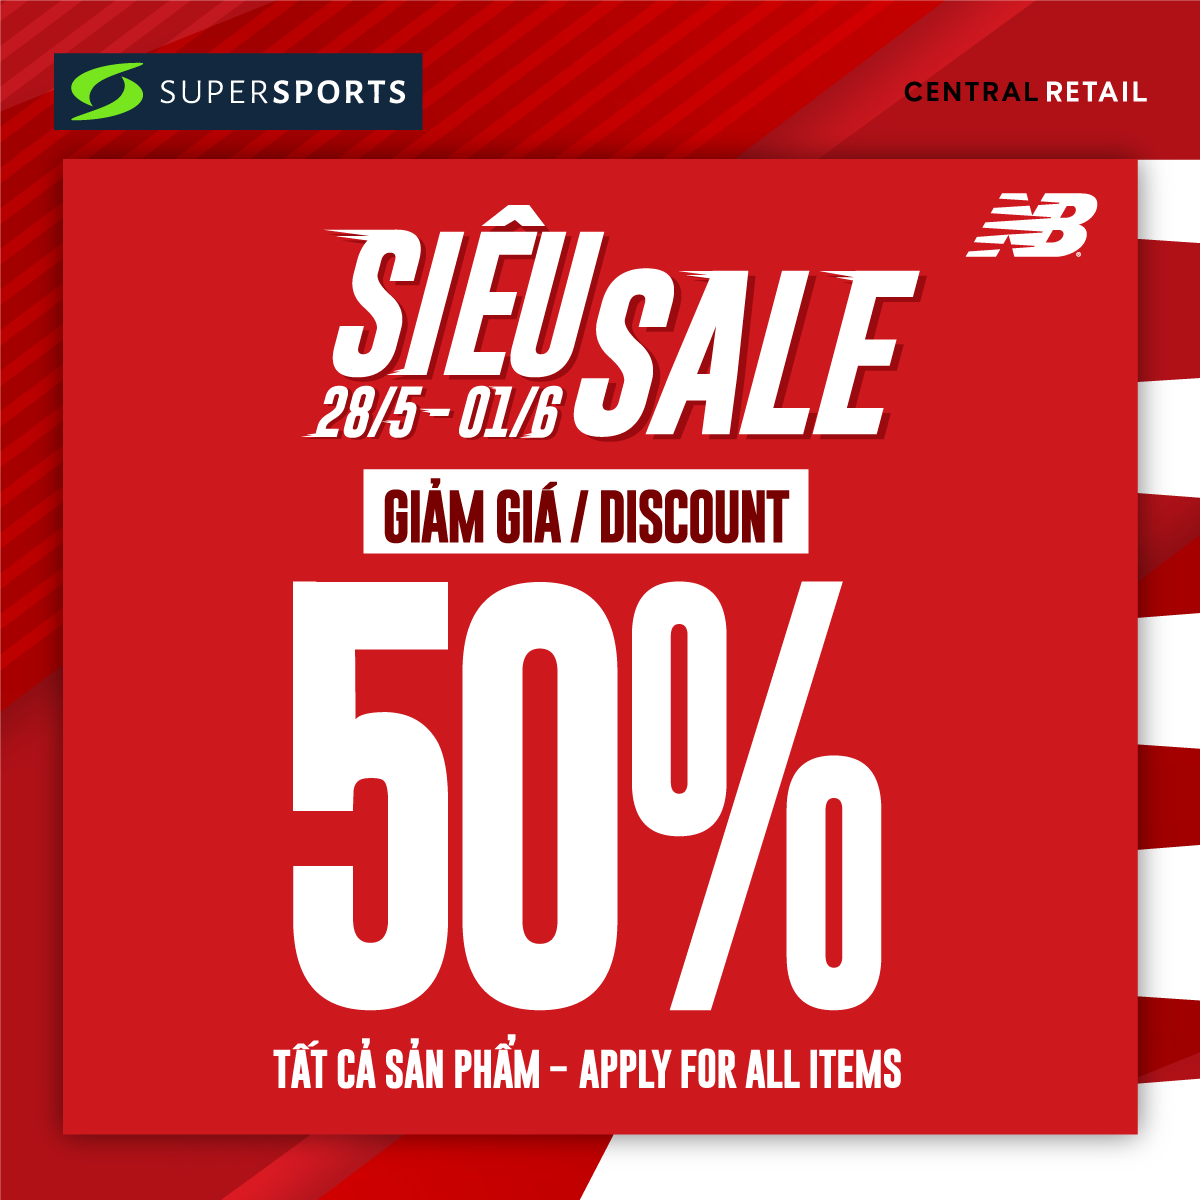 SUPER HOT DEAL AT SUPERSPORTS - DISCOUNT 50% ALL NEW BALANCE ITEMS